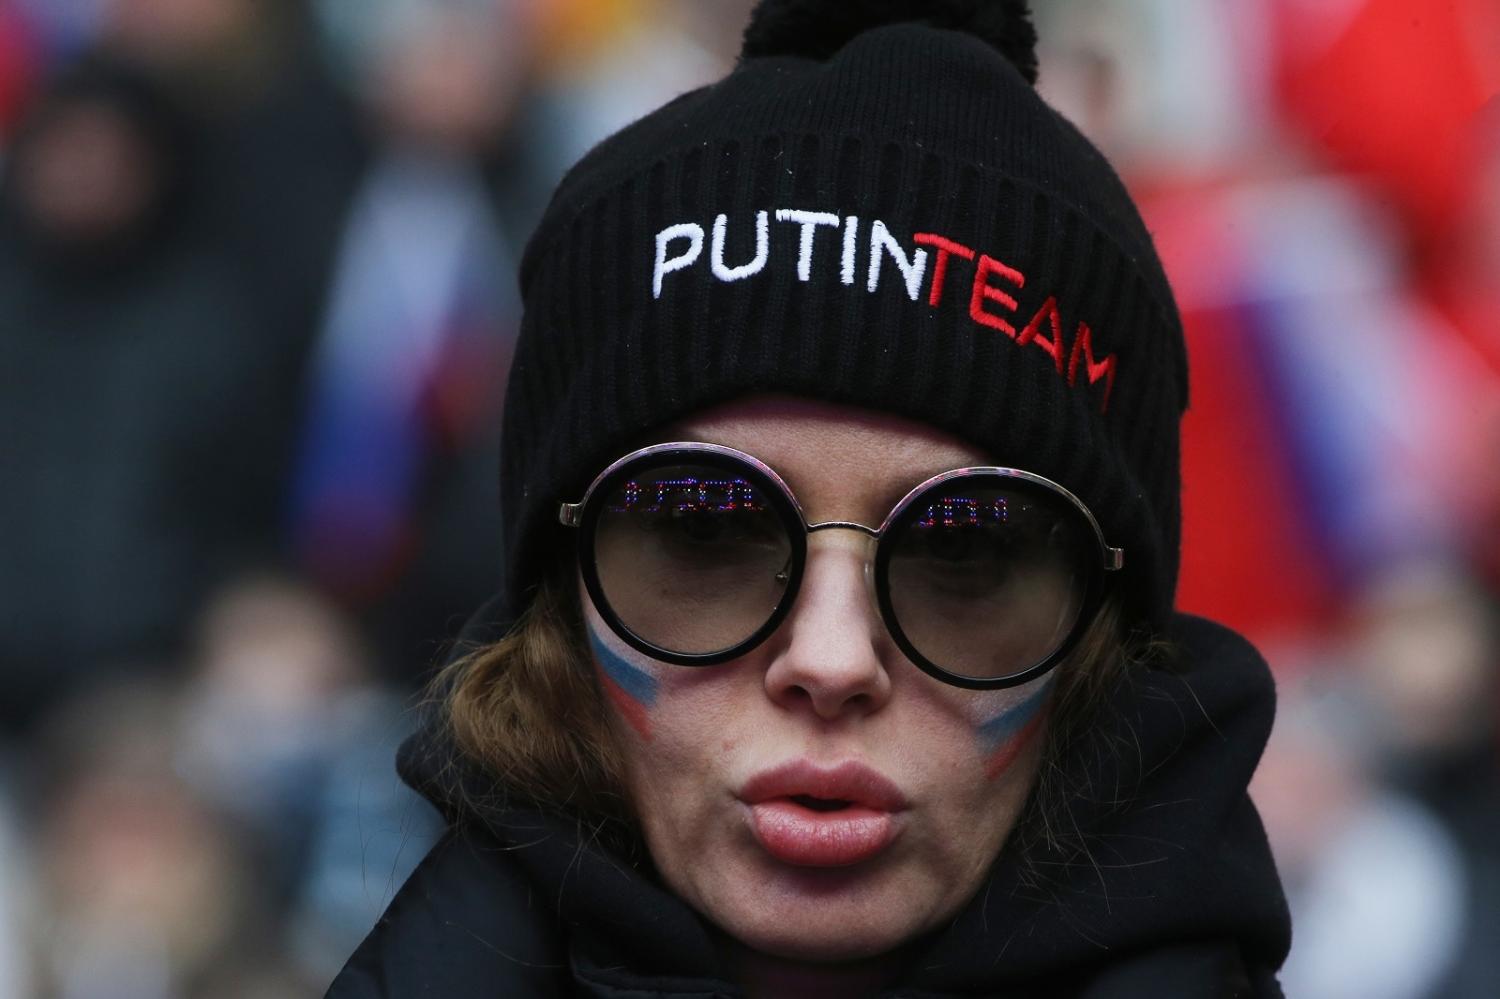 Pro-Putin supporters attend a concert at Luzhniki Stadium, 22 February 2023 in Moscow (Getty Images)